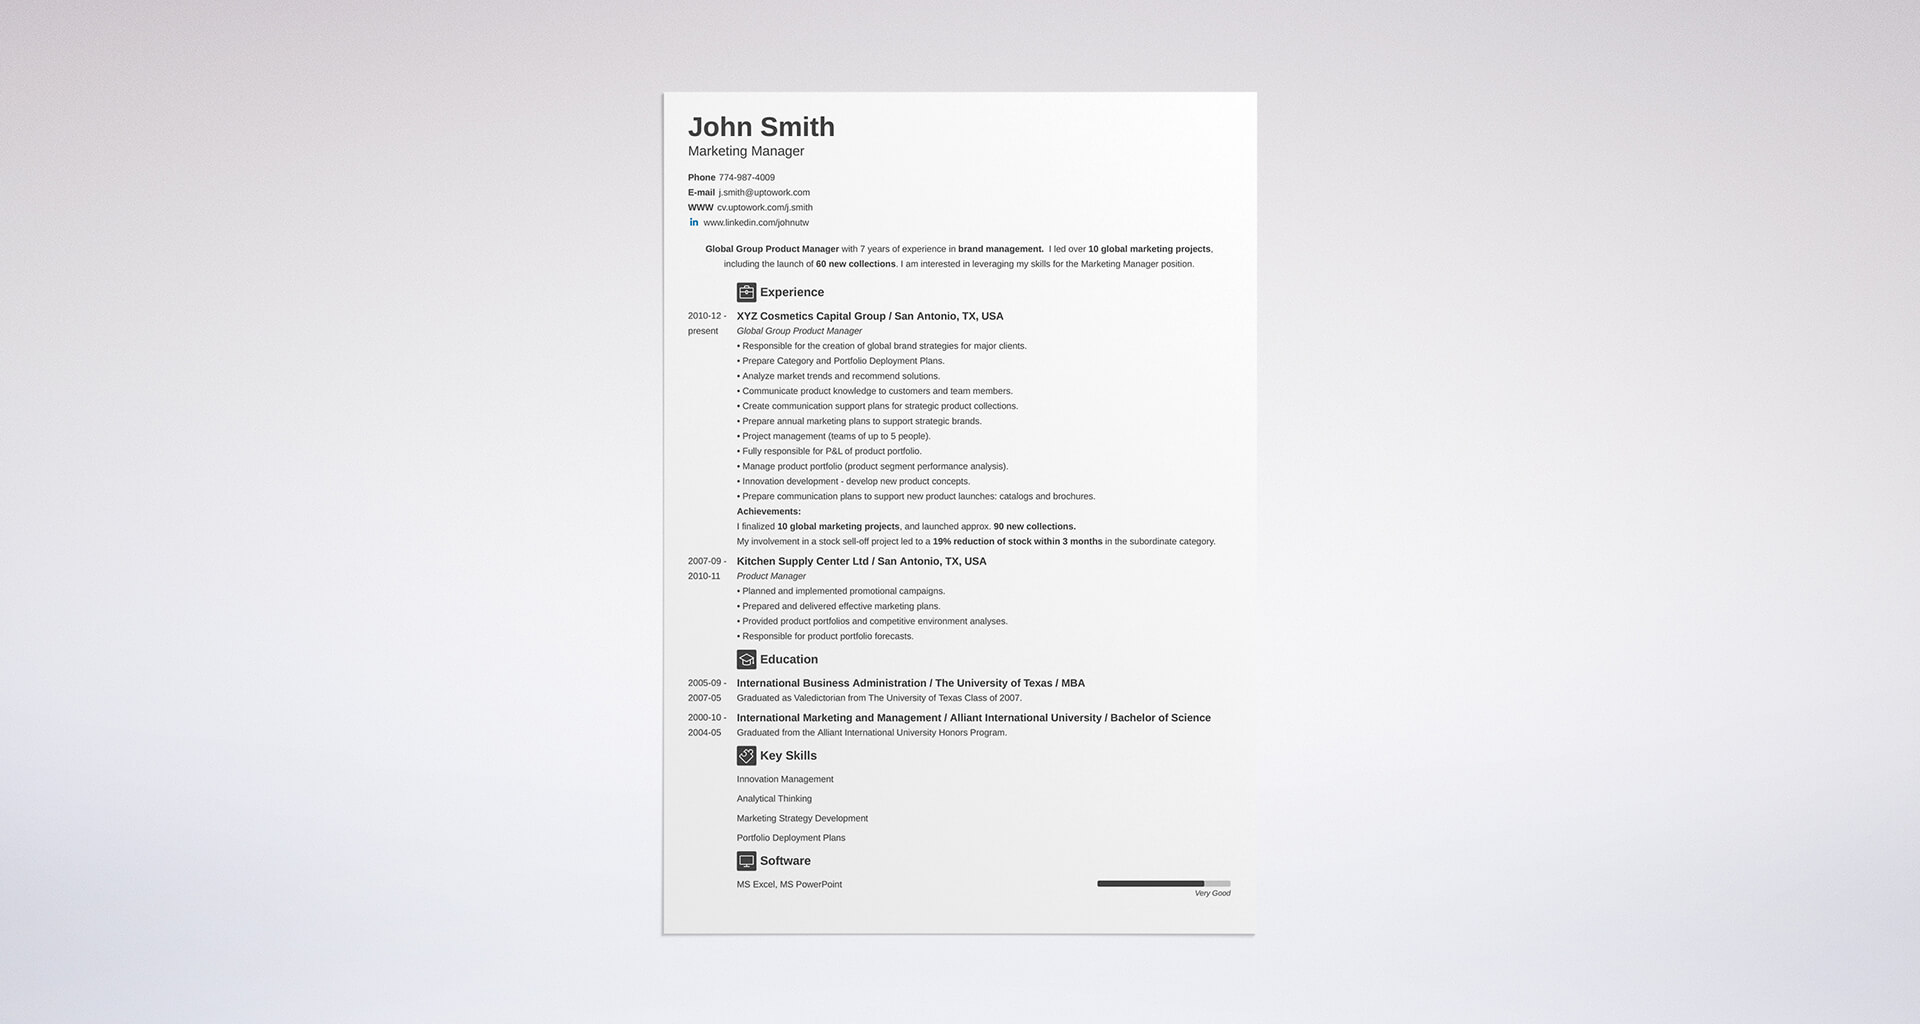 Resume for a Job [from Application.